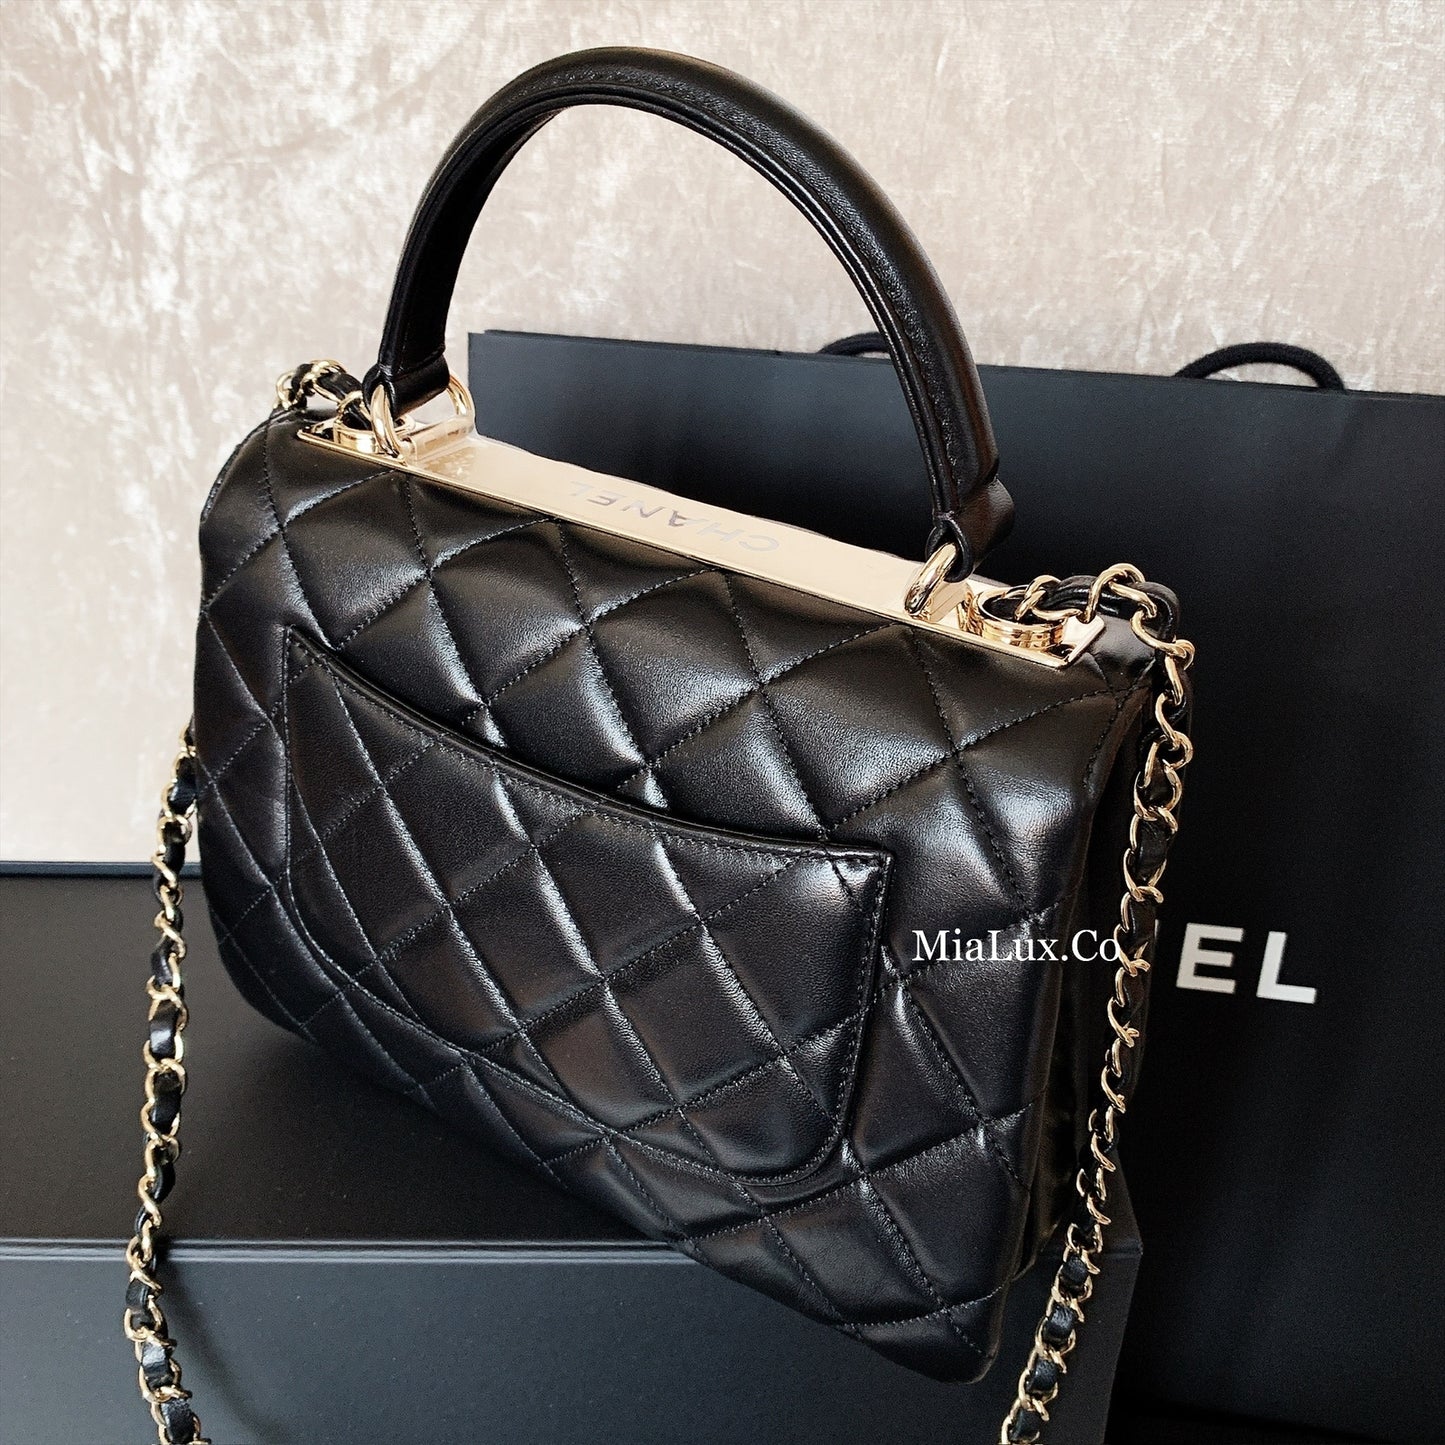 CHANEL✨| FLAP BAG WITH TOP HANDLE 小款手把翻蓋包 A92236 *£5,800